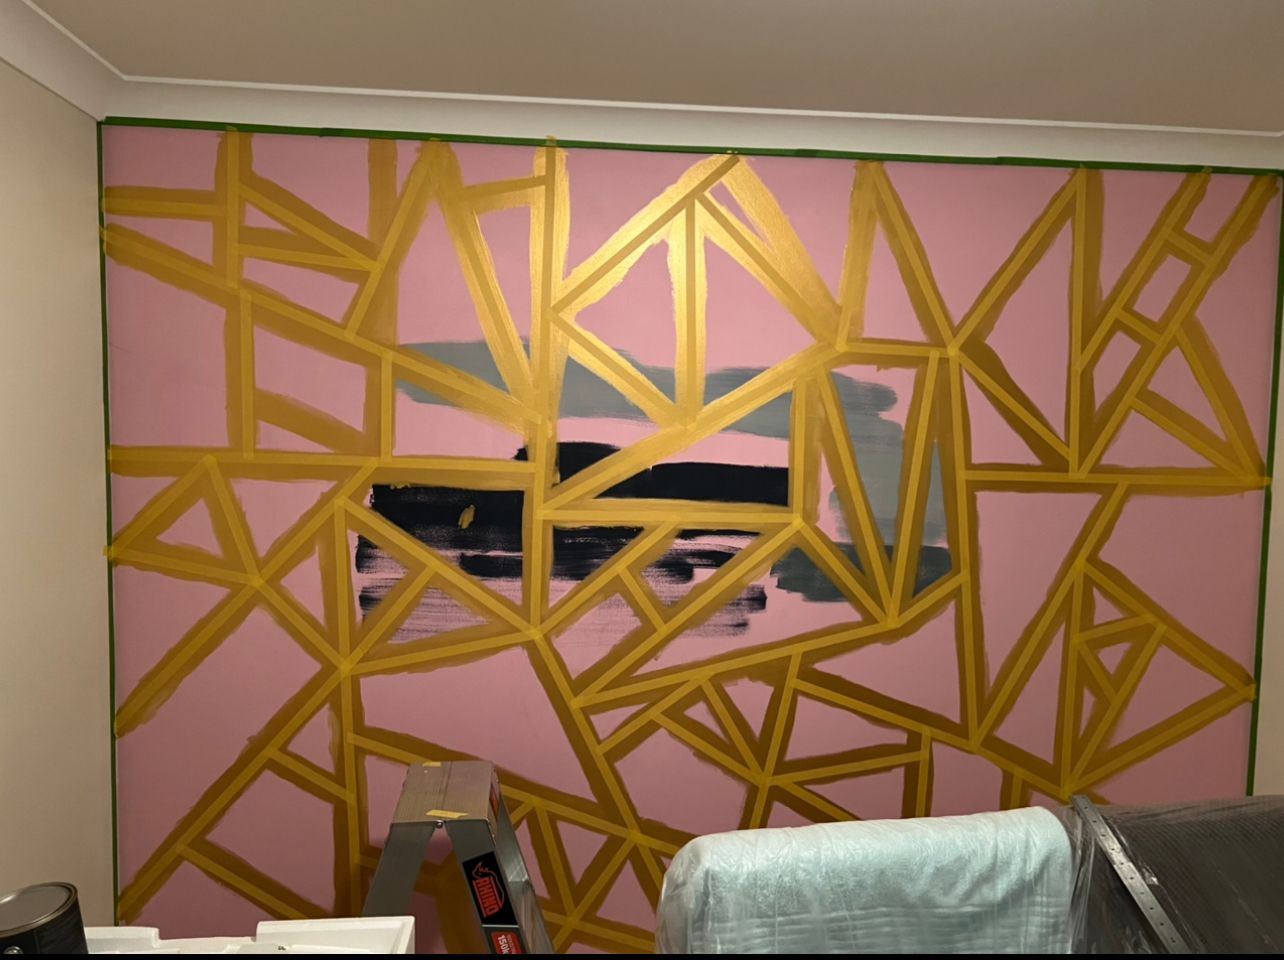 how to create a gold geometric feature wall in 20 minutesand